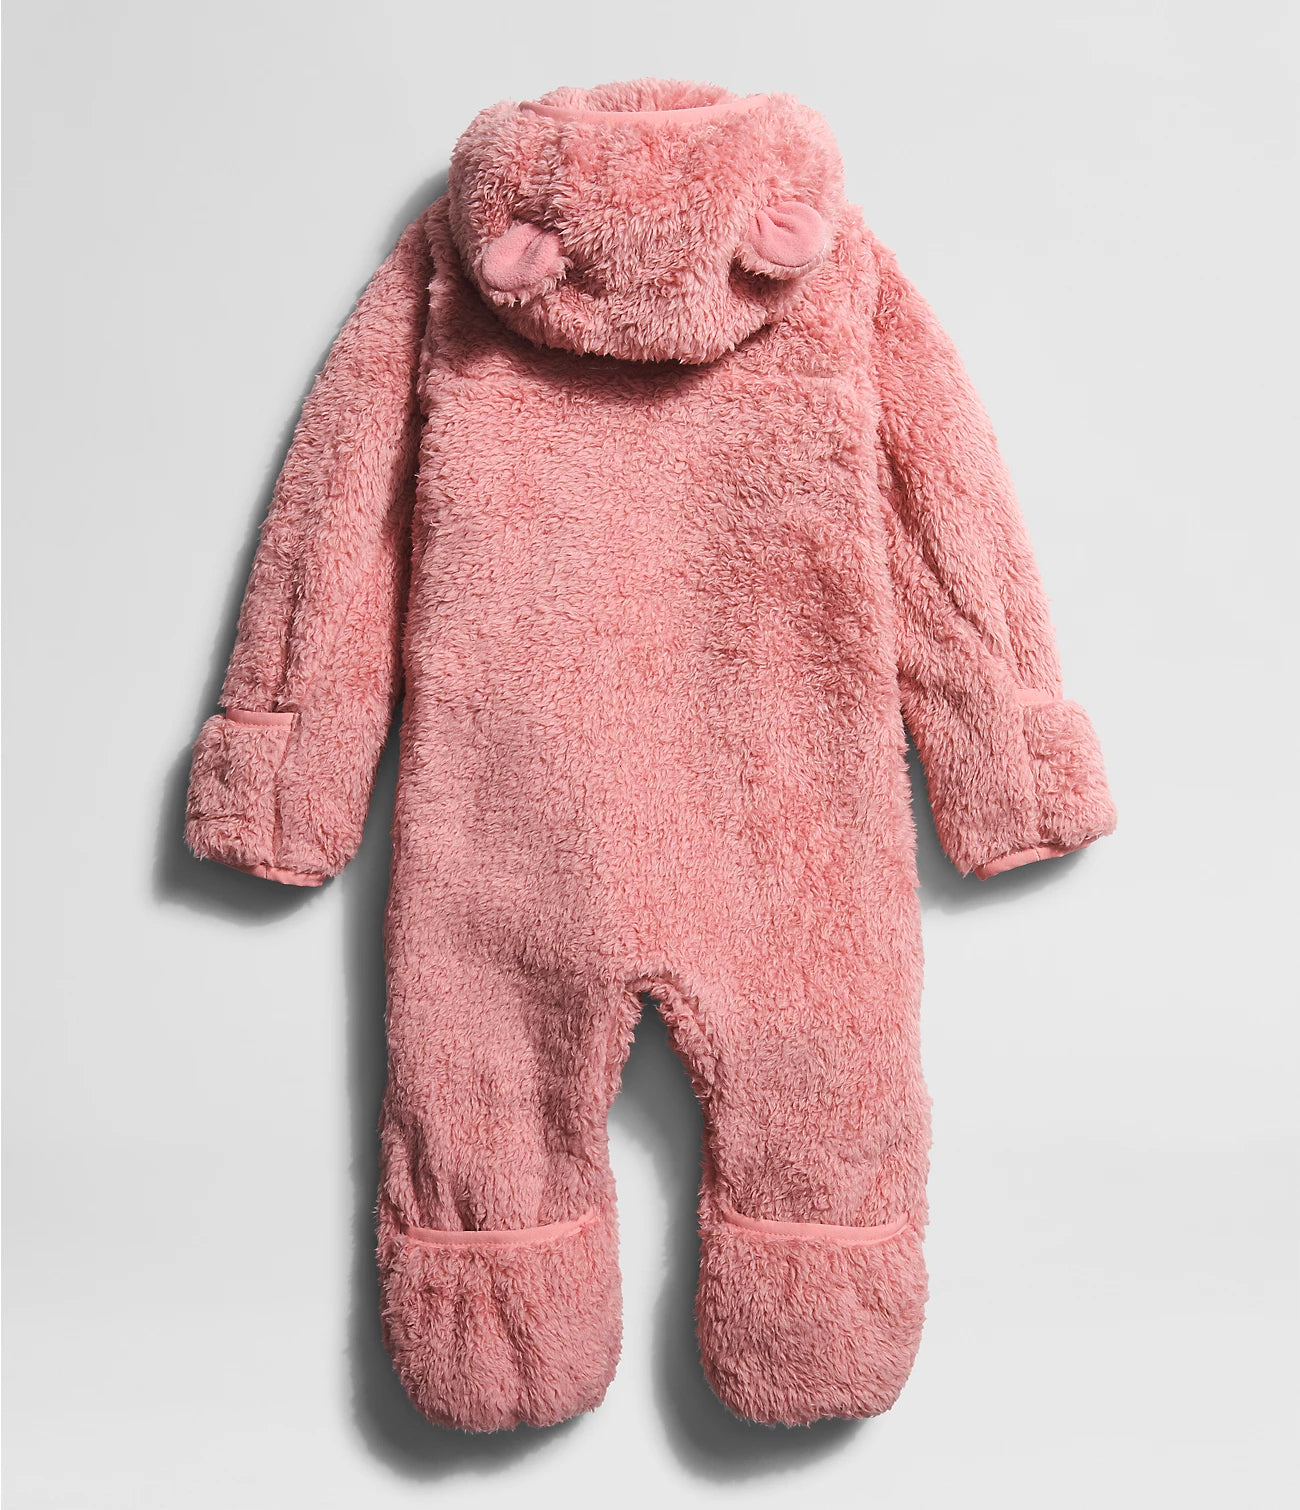 North Face - Baby bear suit